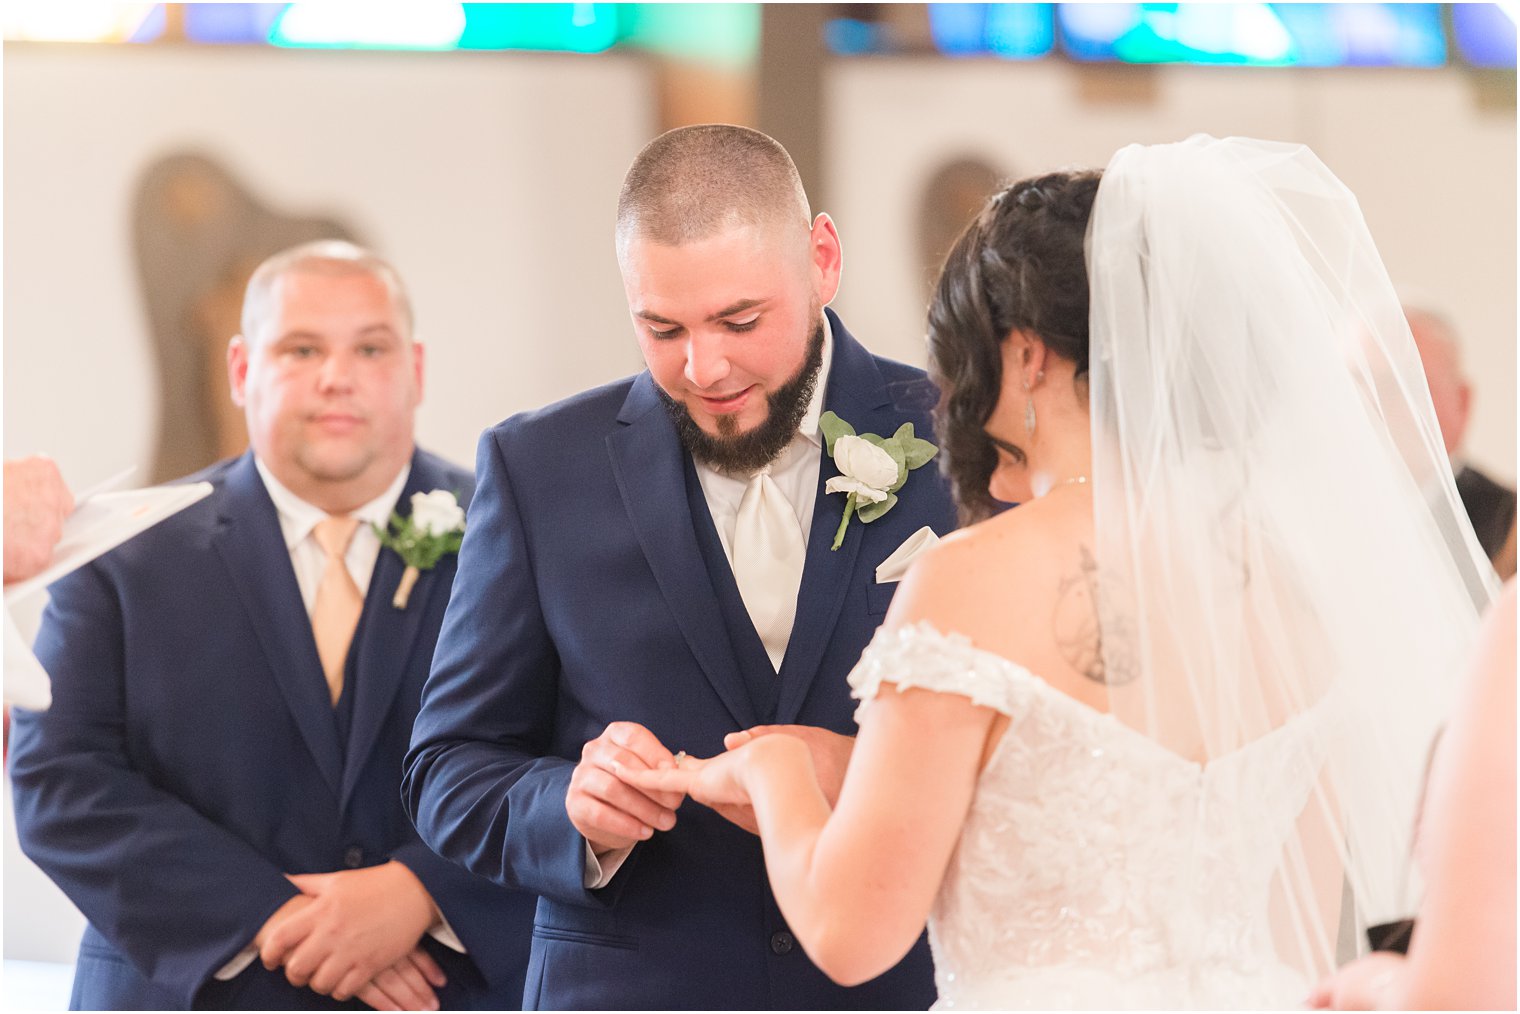 groom puts ring on bride's finger during traditional wedding ceremony at Saint Matthew the Apostle church